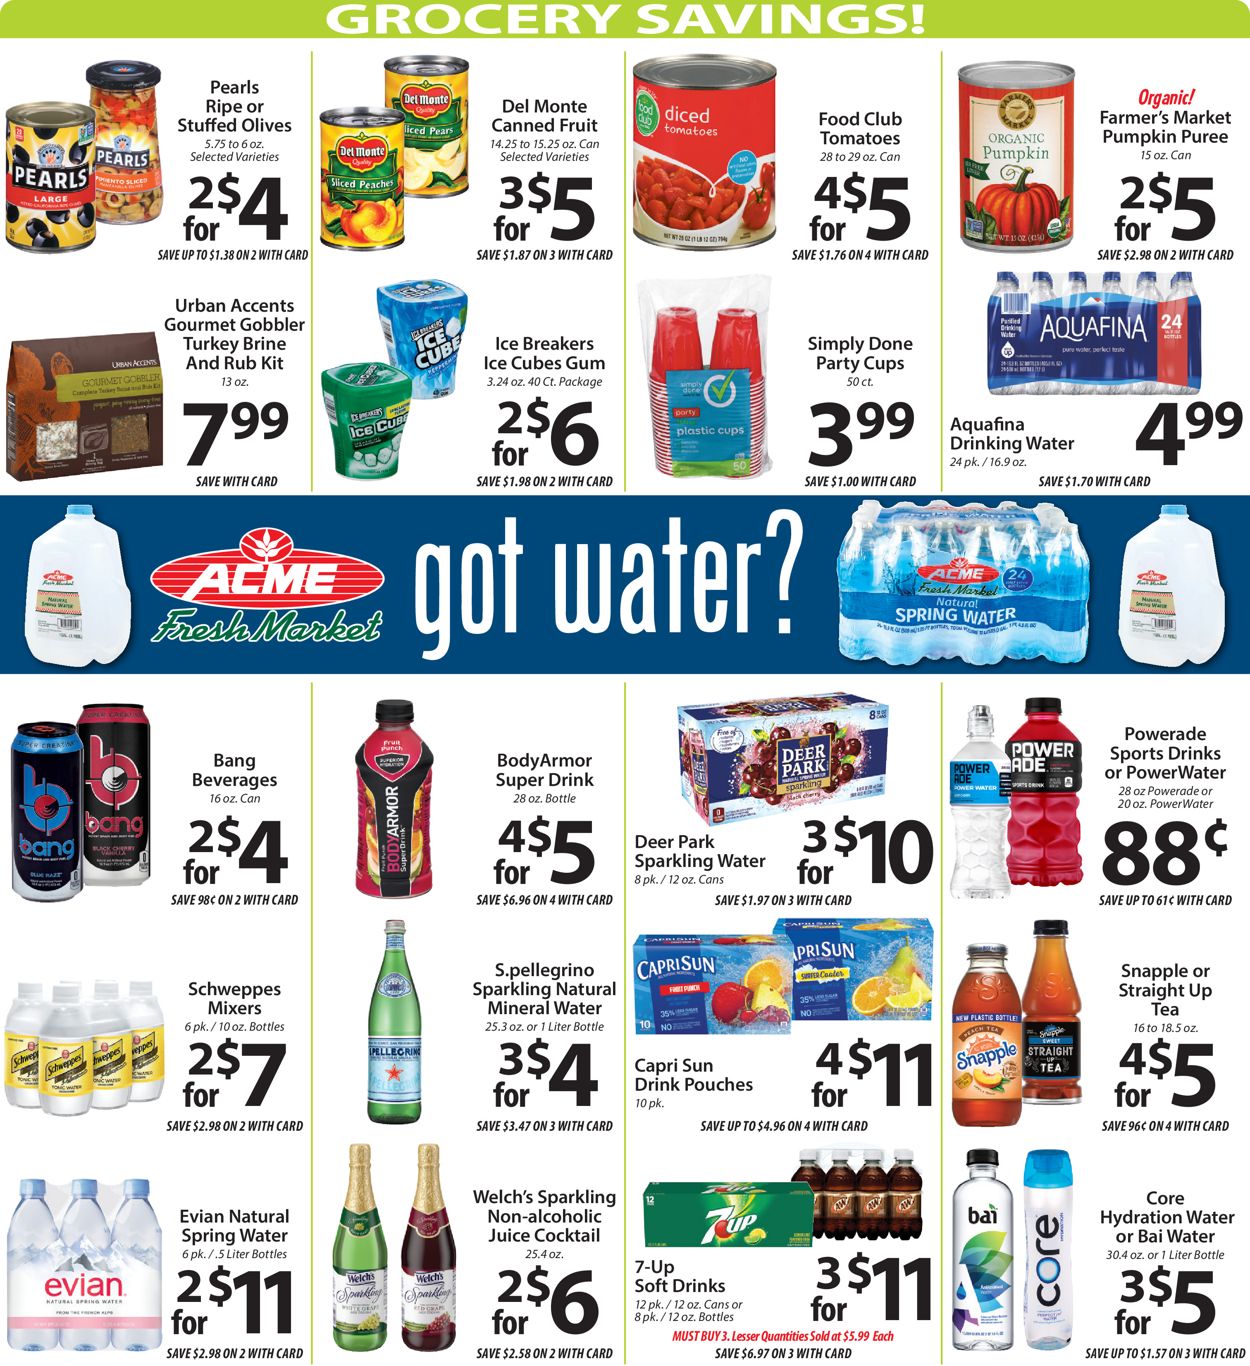 Acme Fresh Market Current weekly ad 11/12 - 11/18/2020.